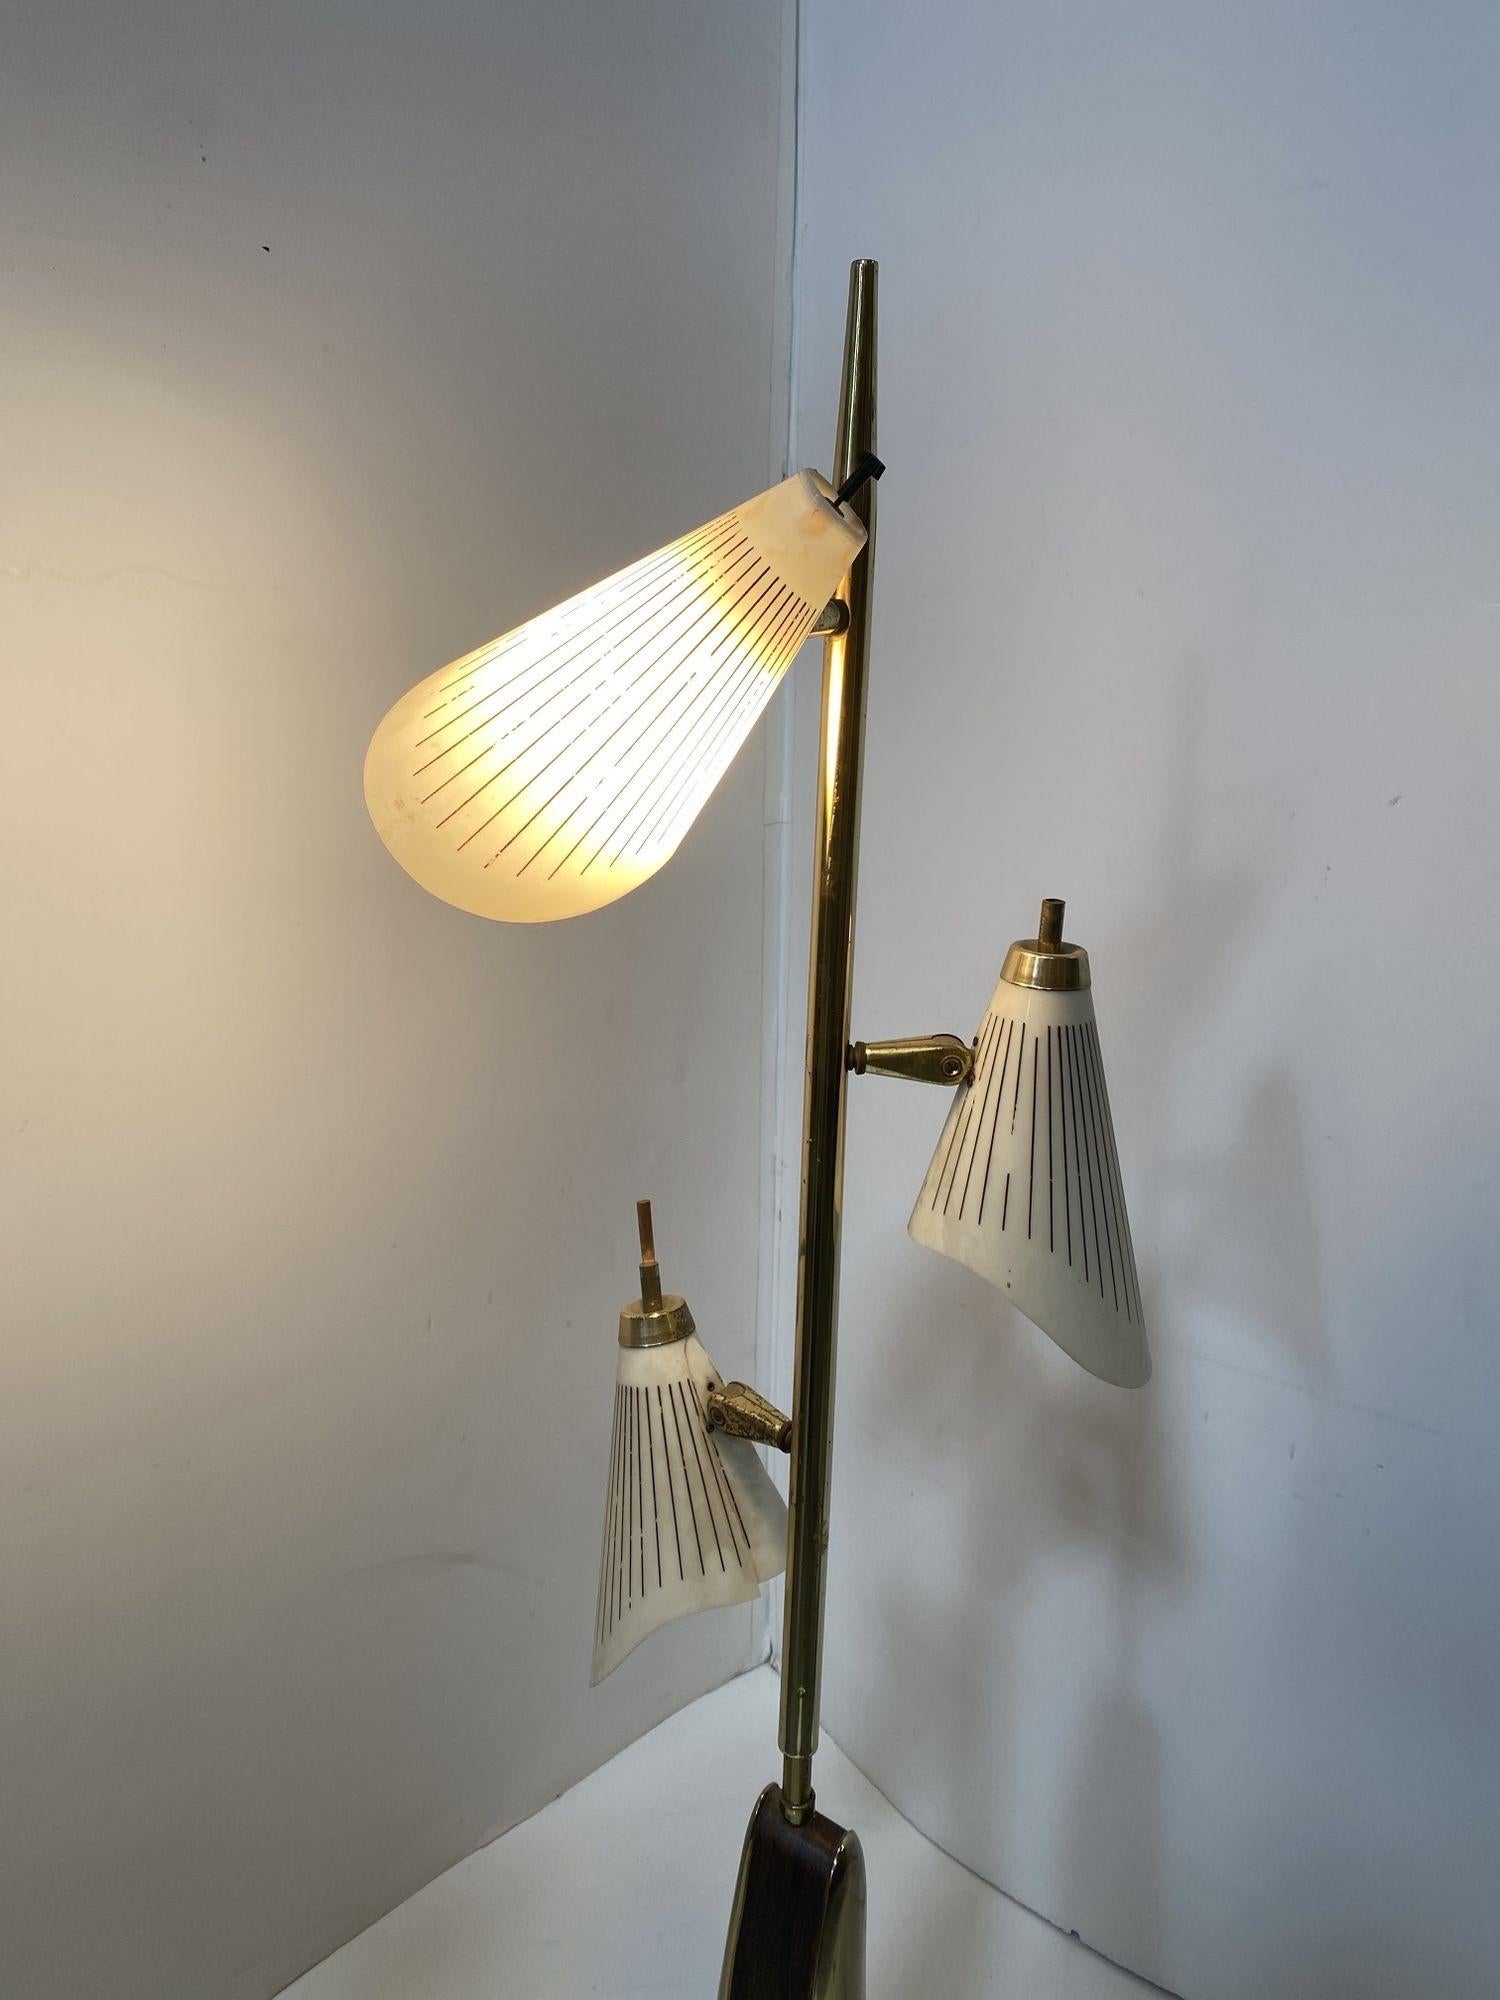 A unique two-tone polished brass Mid-century floor lamp featuring a casted sculptural base and fiberglass shades. Drawing from natural forms like driftwood with Googie styled shades this lamp features a unique look that fits in any Mid-century